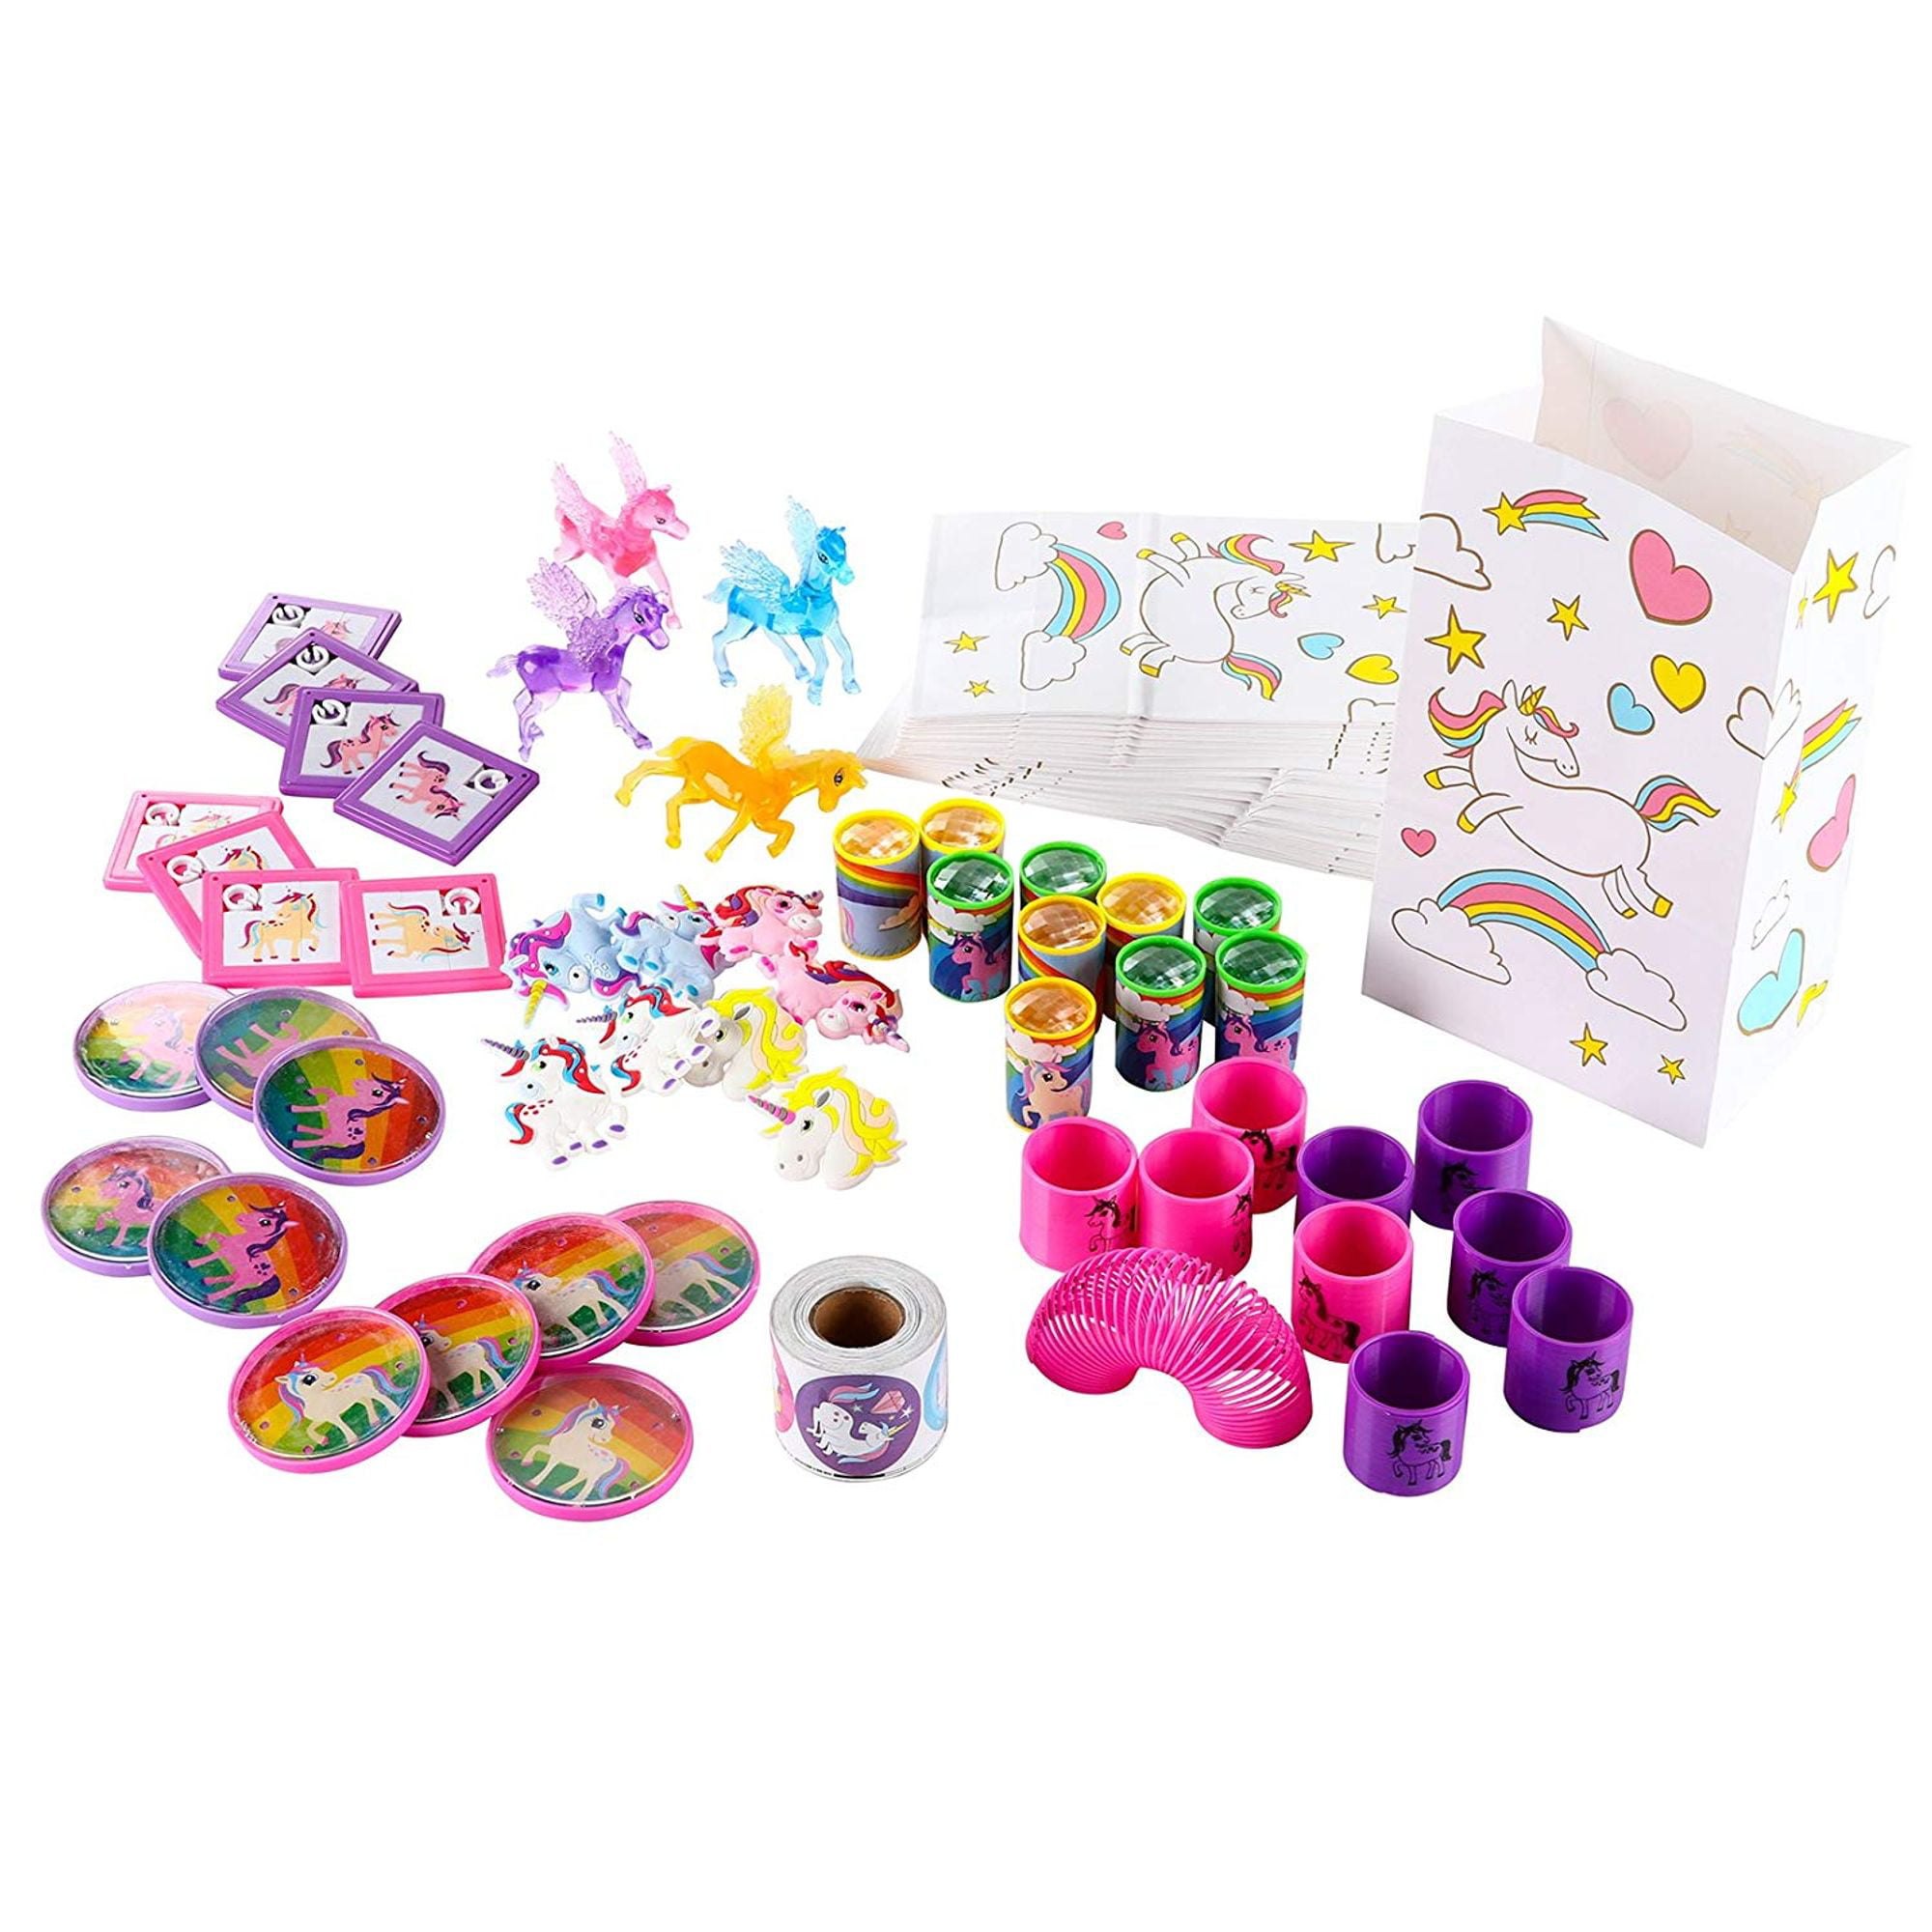 6-30 UNICORN mini JIGSAW PUZZLE toy game party bag filler goody loot boy girl